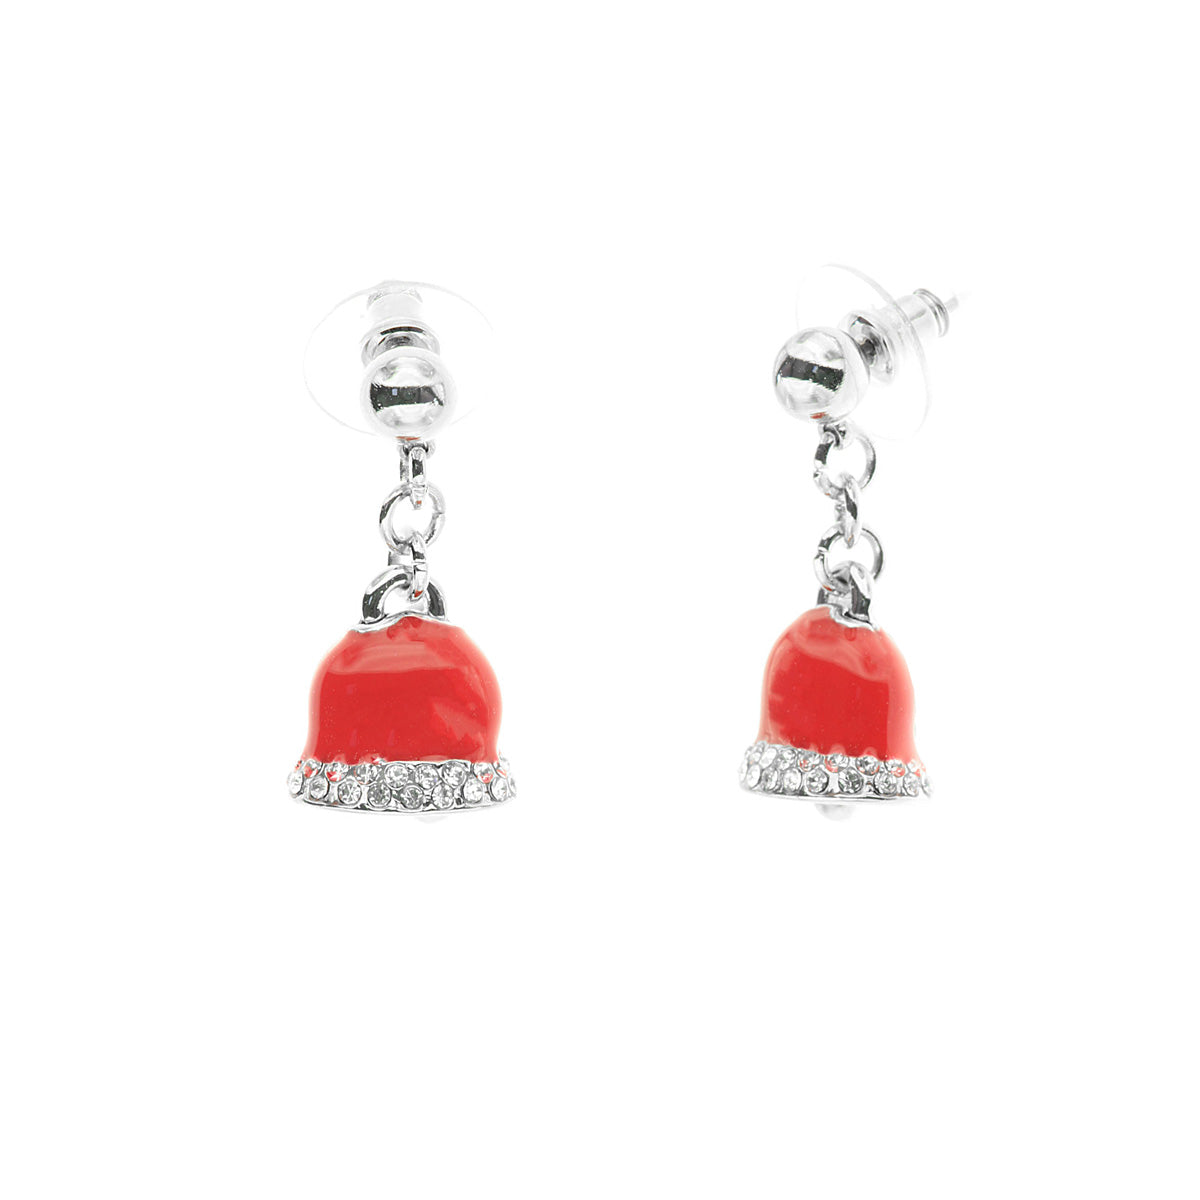 Metal earrings with red glazed charms and white crystals